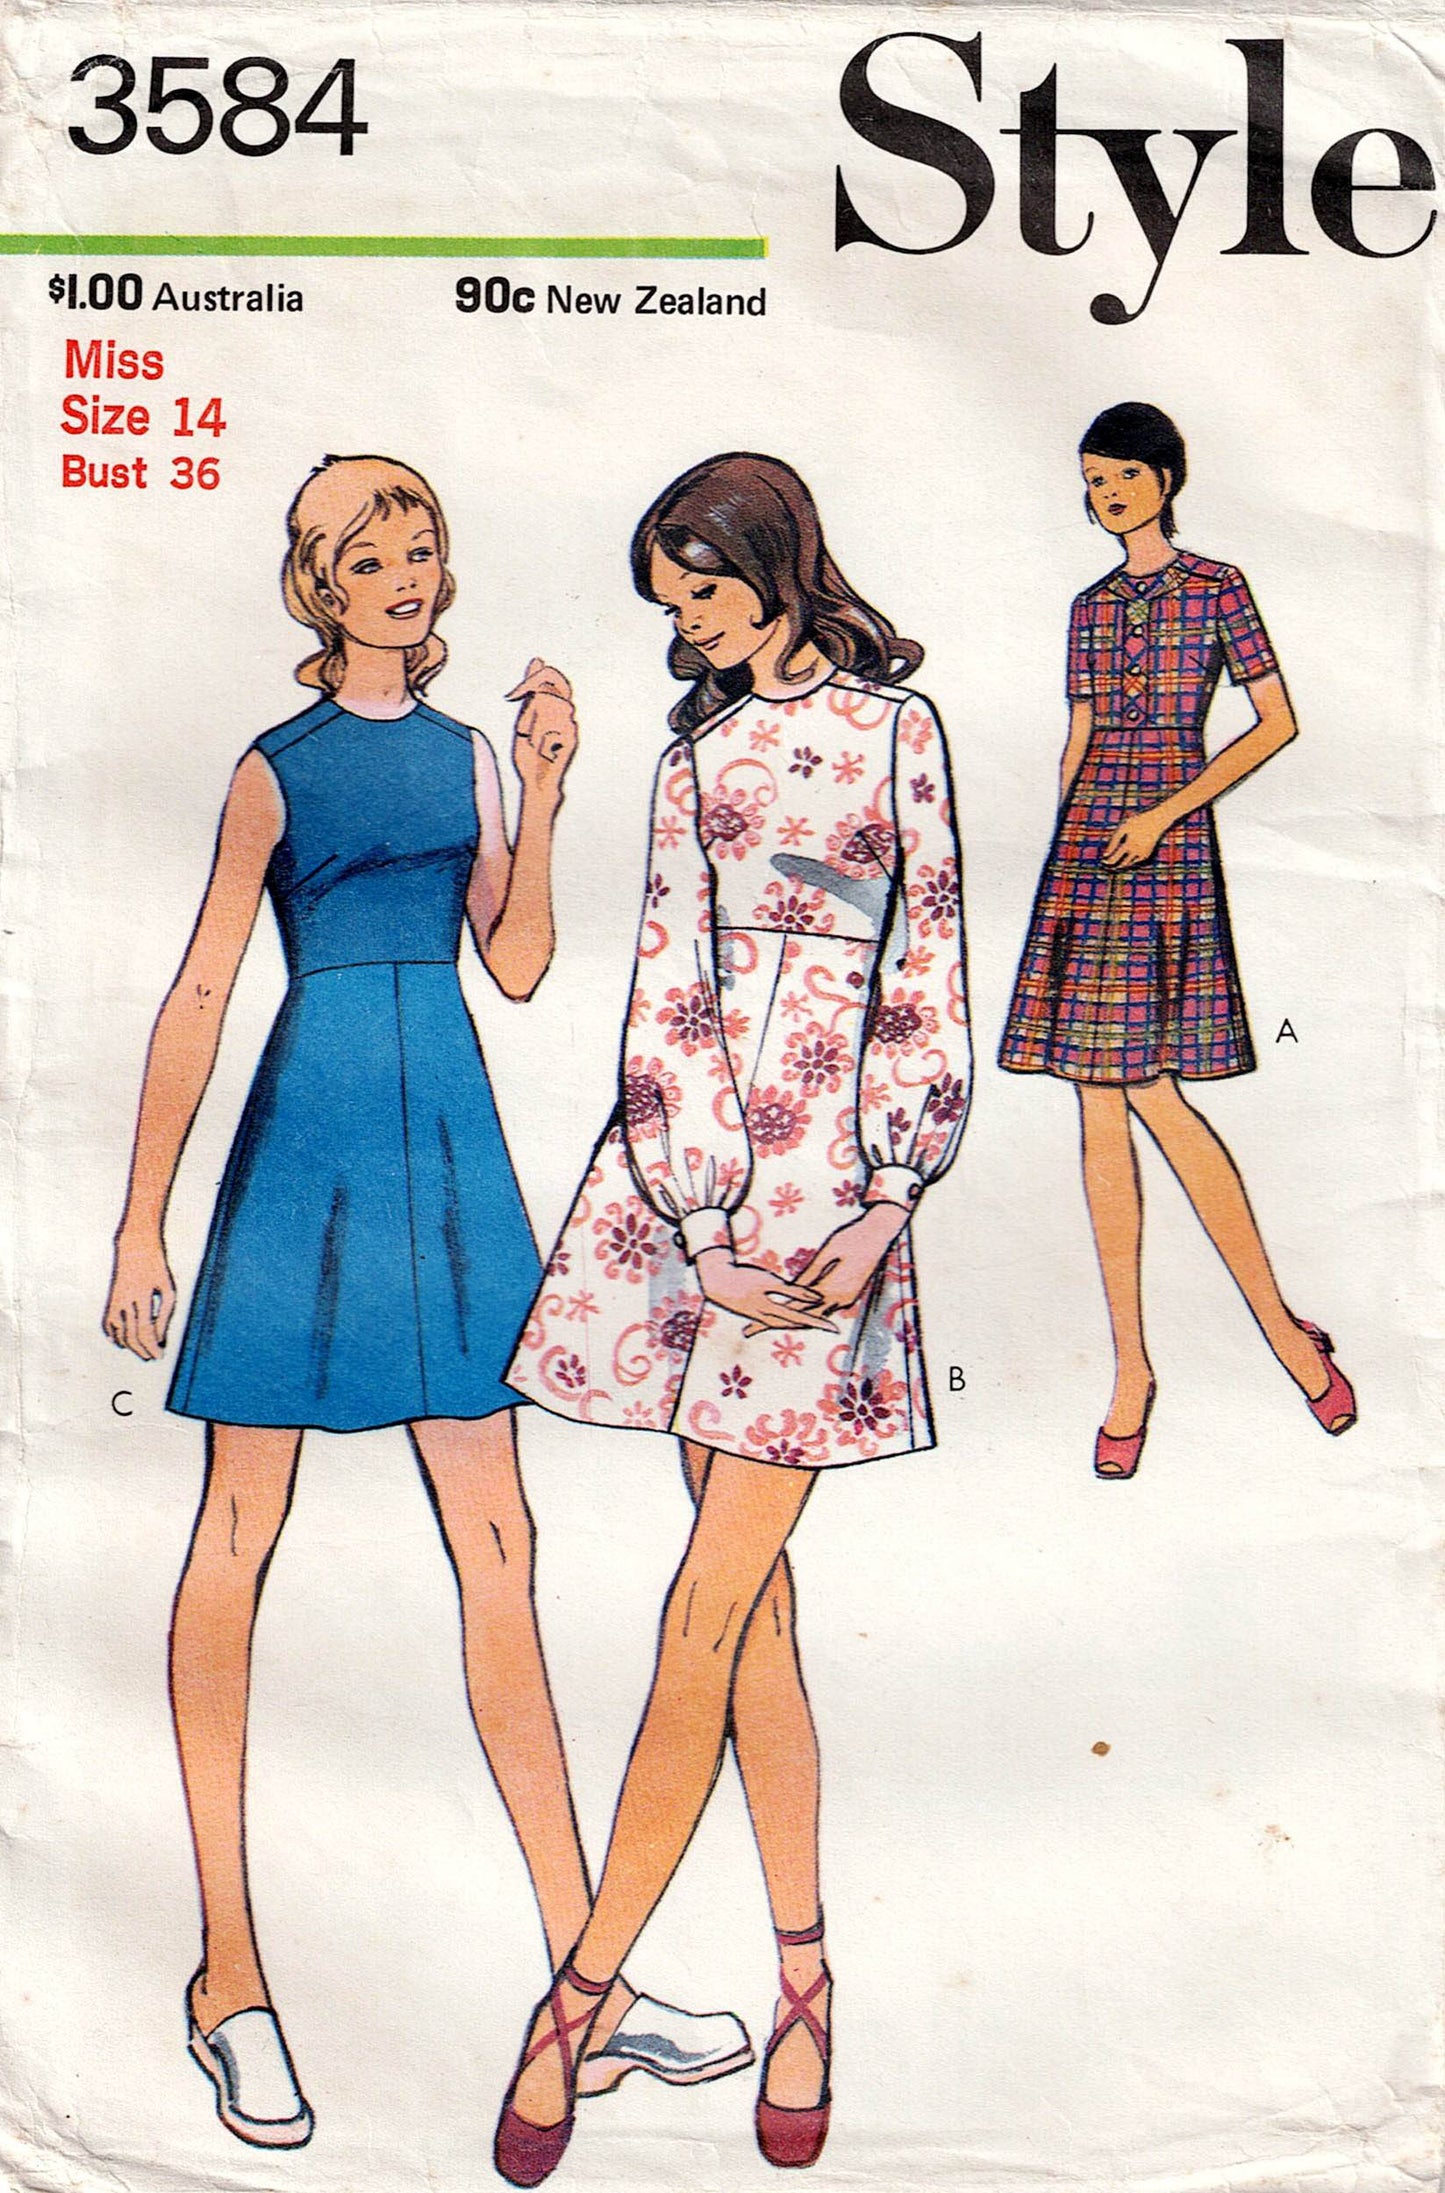 Style 3584 Womens Empire Waist Dress with Sleeve & Bodice Tab Options 1970s Vintage Sewing Pattern Size 12 or 14